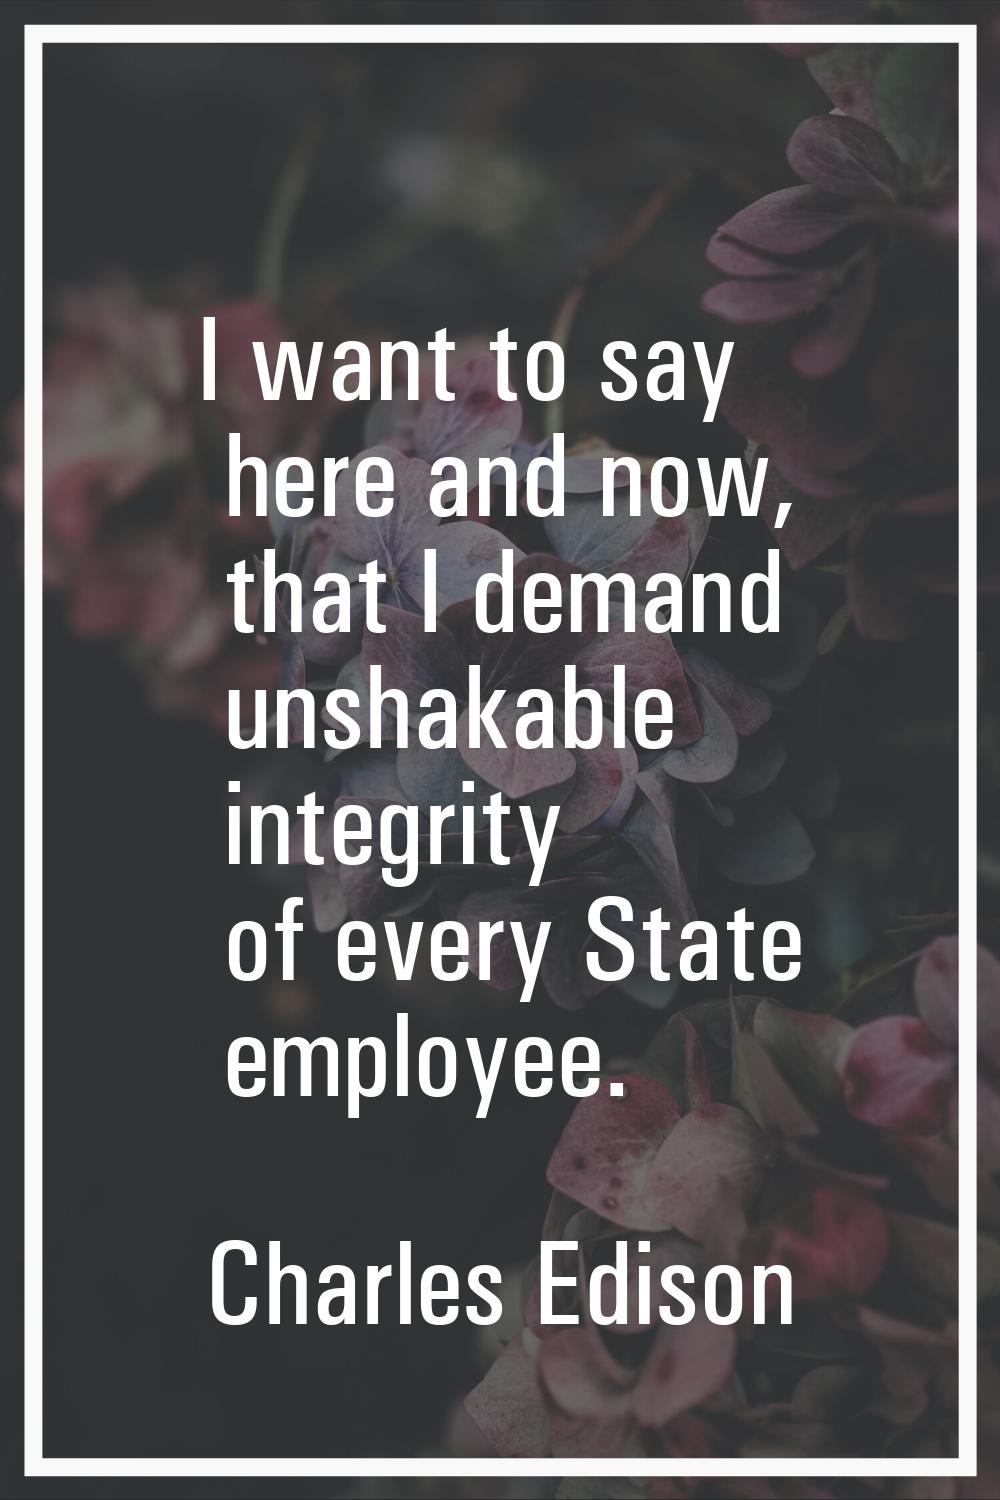 I want to say here and now, that I demand unshakable integrity of every State employee.